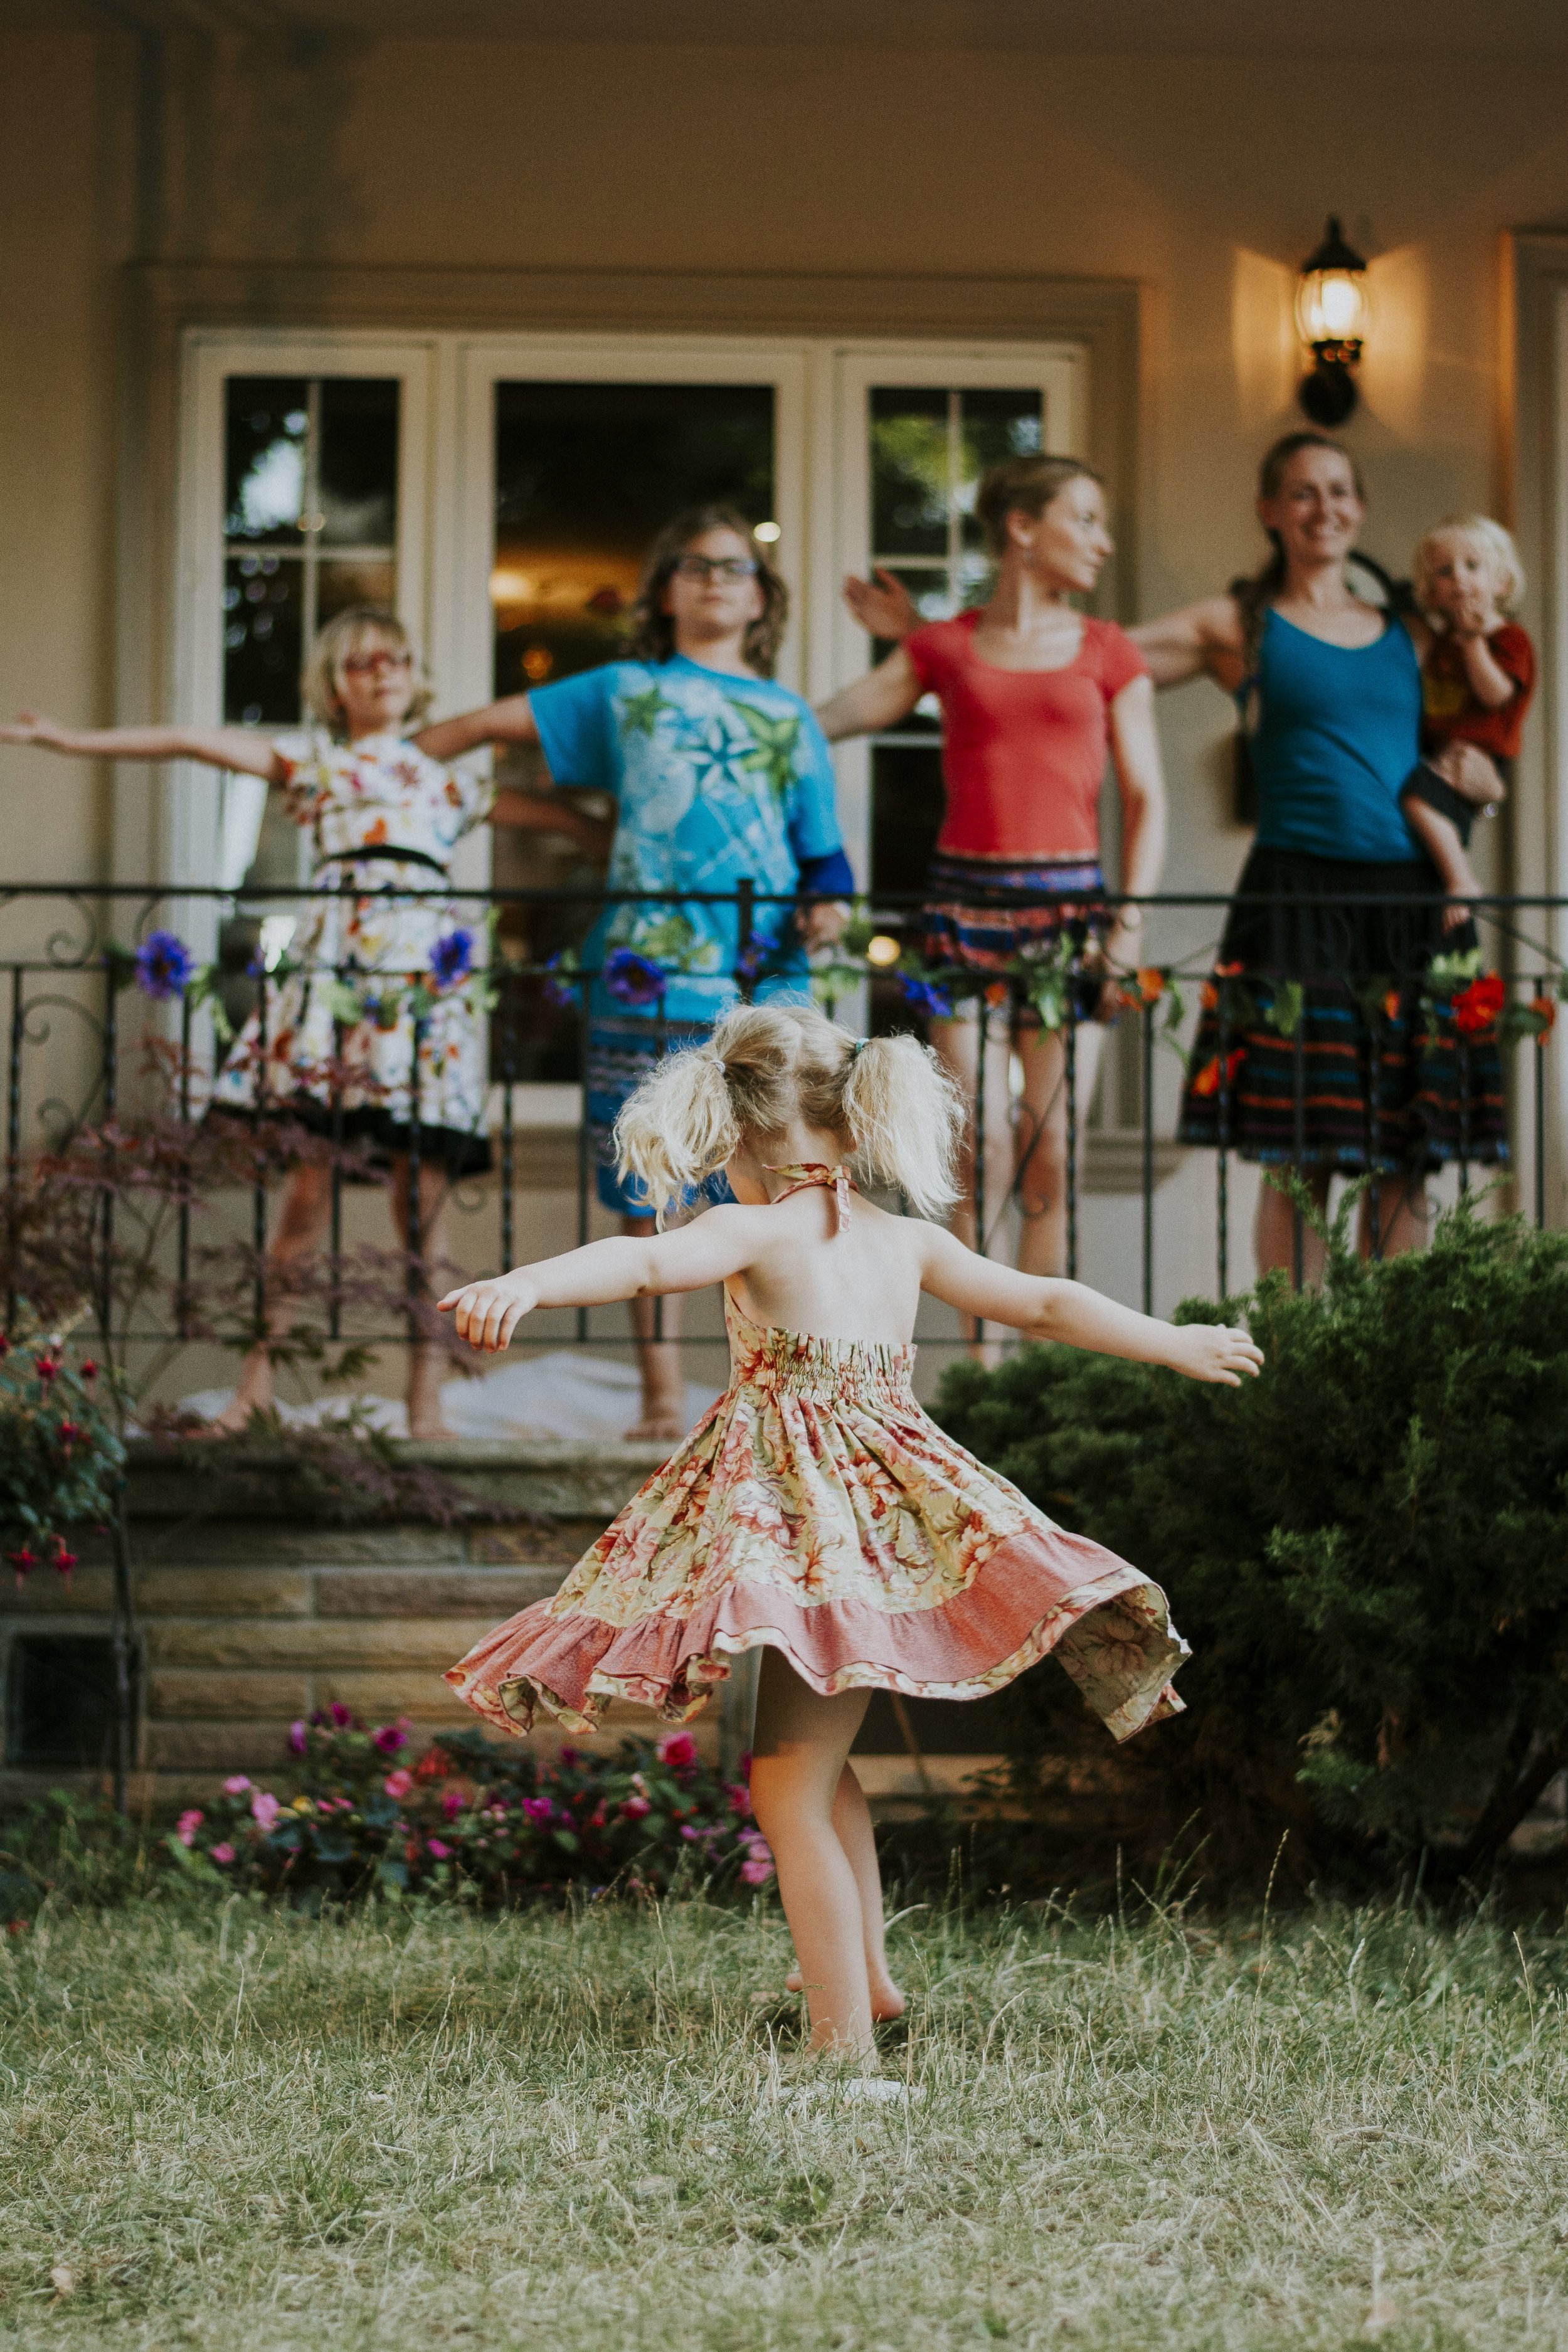 A young girl, happily twirling on the grass, as a family watches her over their porch